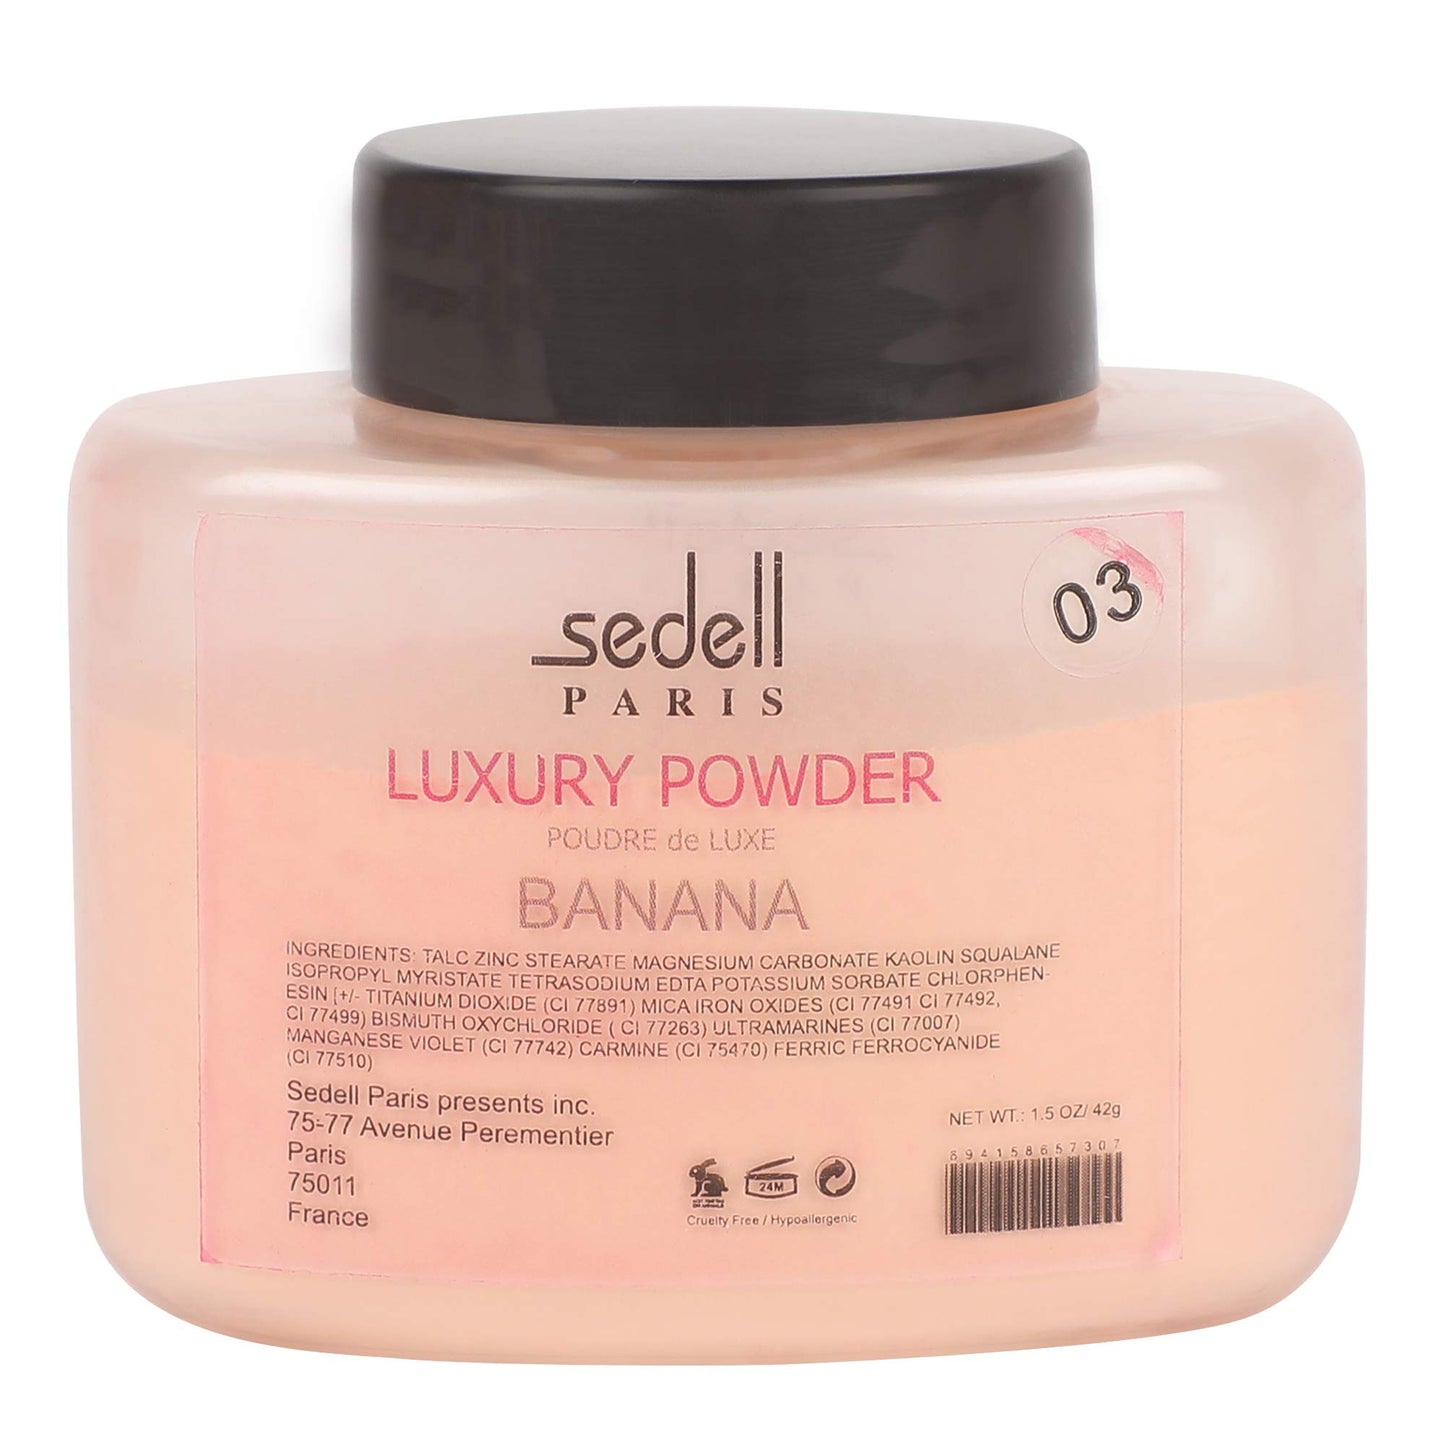 Sedell Luxary Powder-03, Beige, 42 g